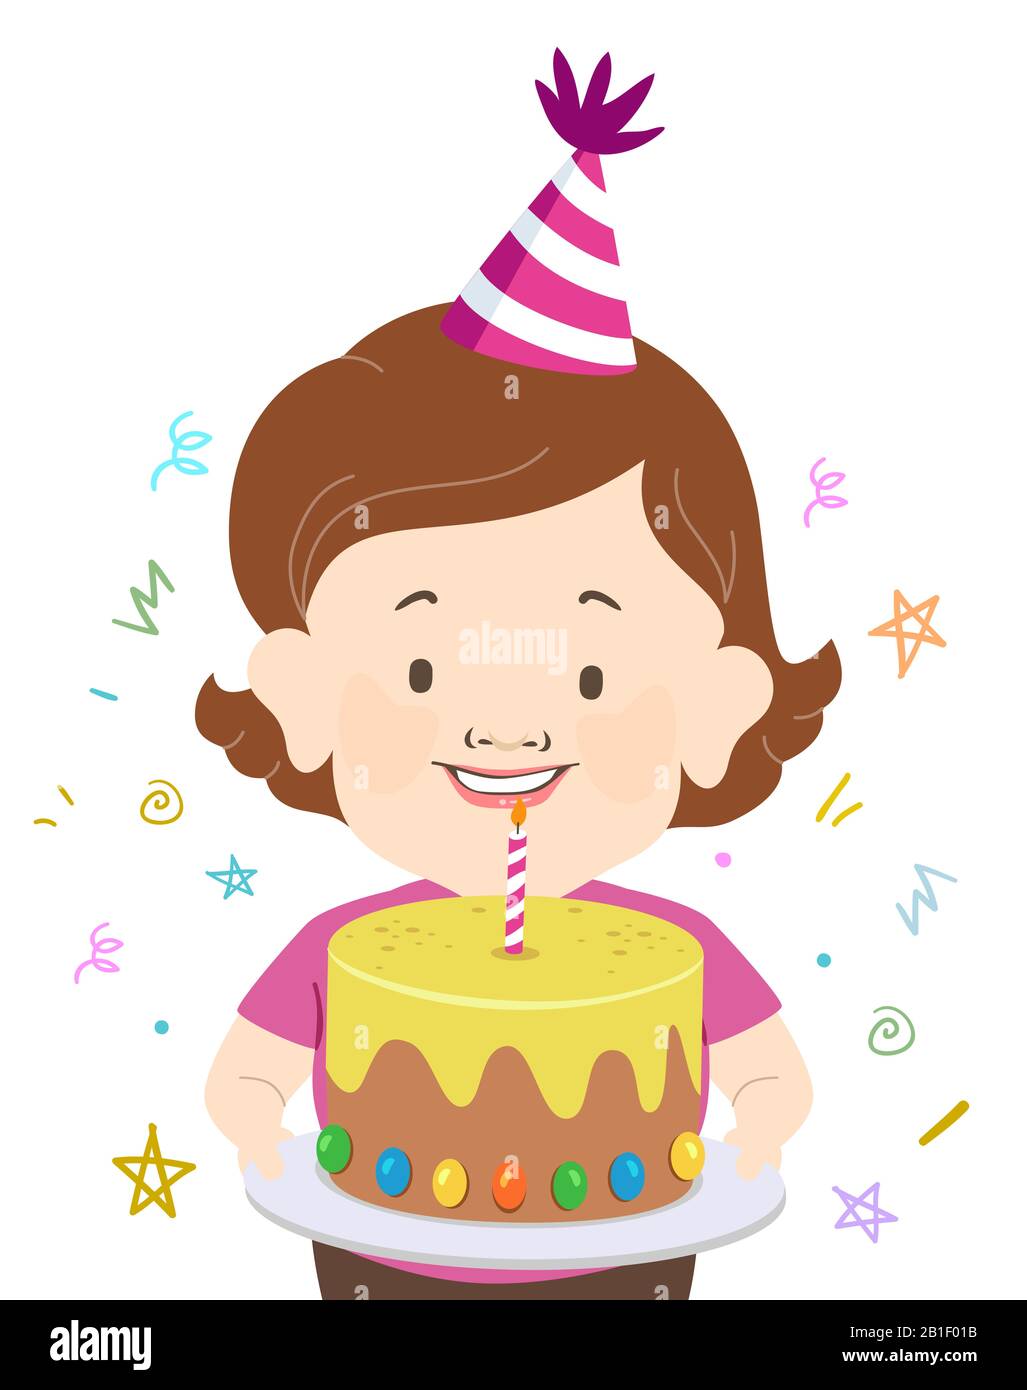 Illustration of a Girl with Dwarfism Holding a Birthday Cake, Wearing Party Hat Stock Photo